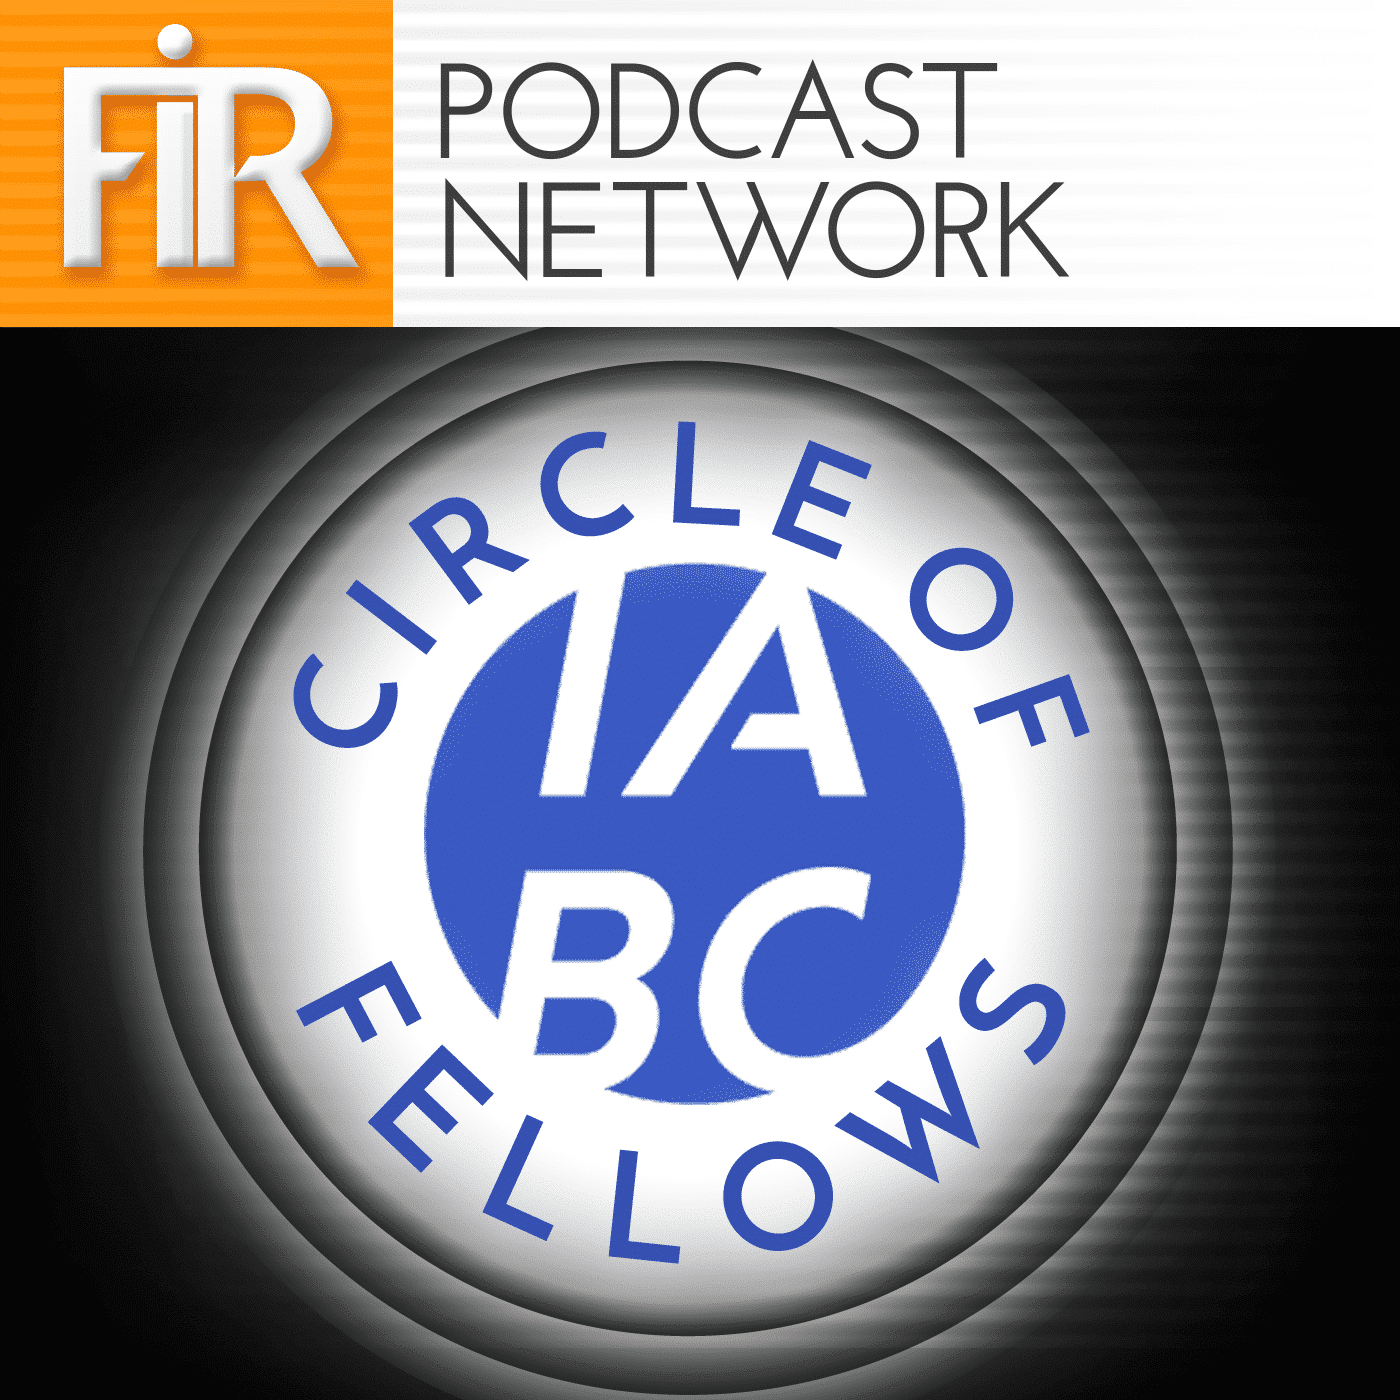 Image for the Circle of Fellows podcast